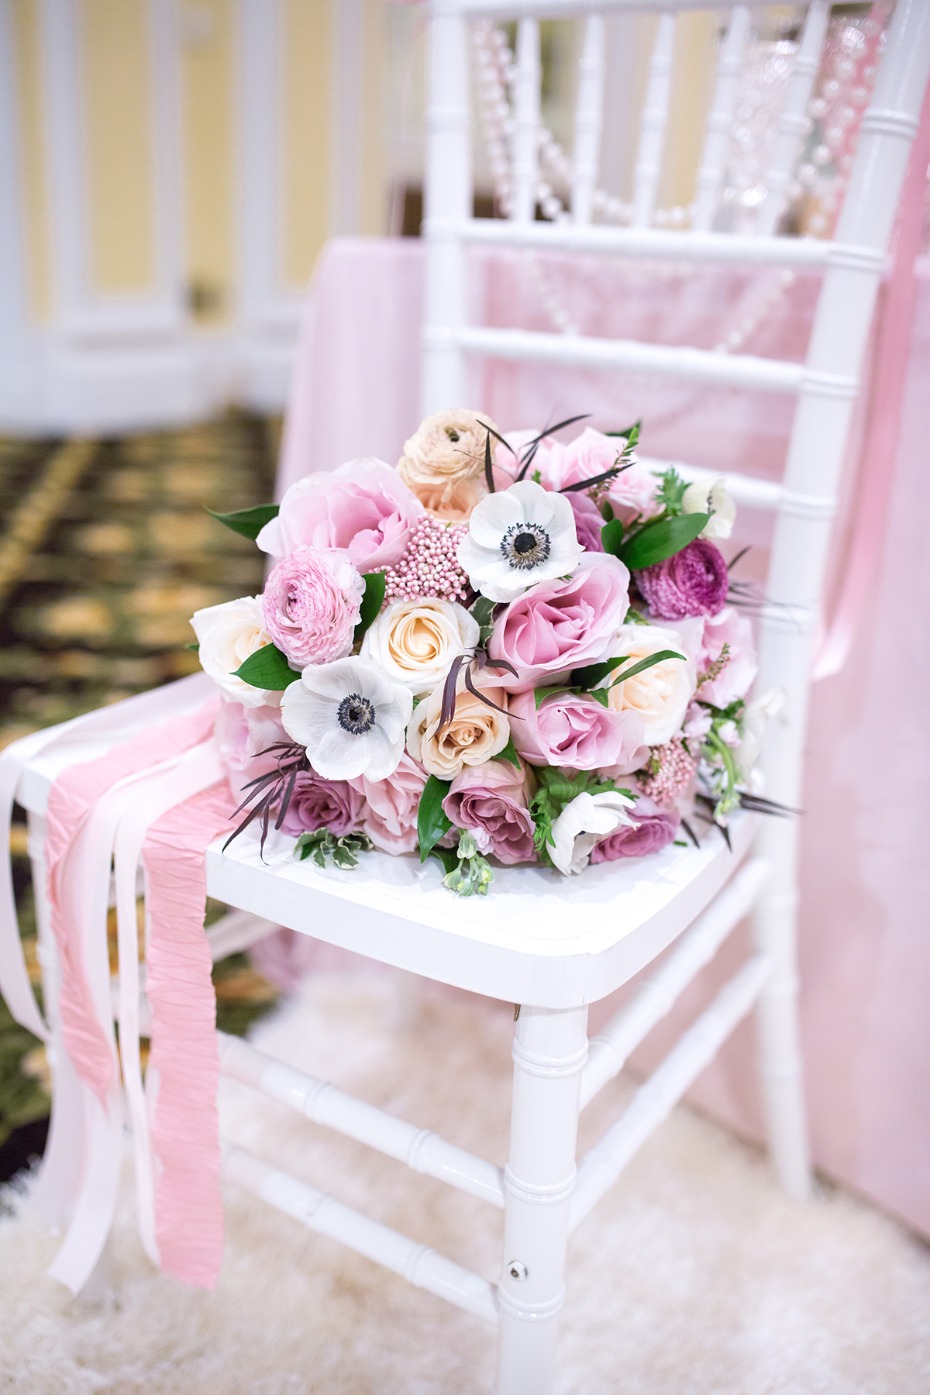 pink and white wedding bouquet